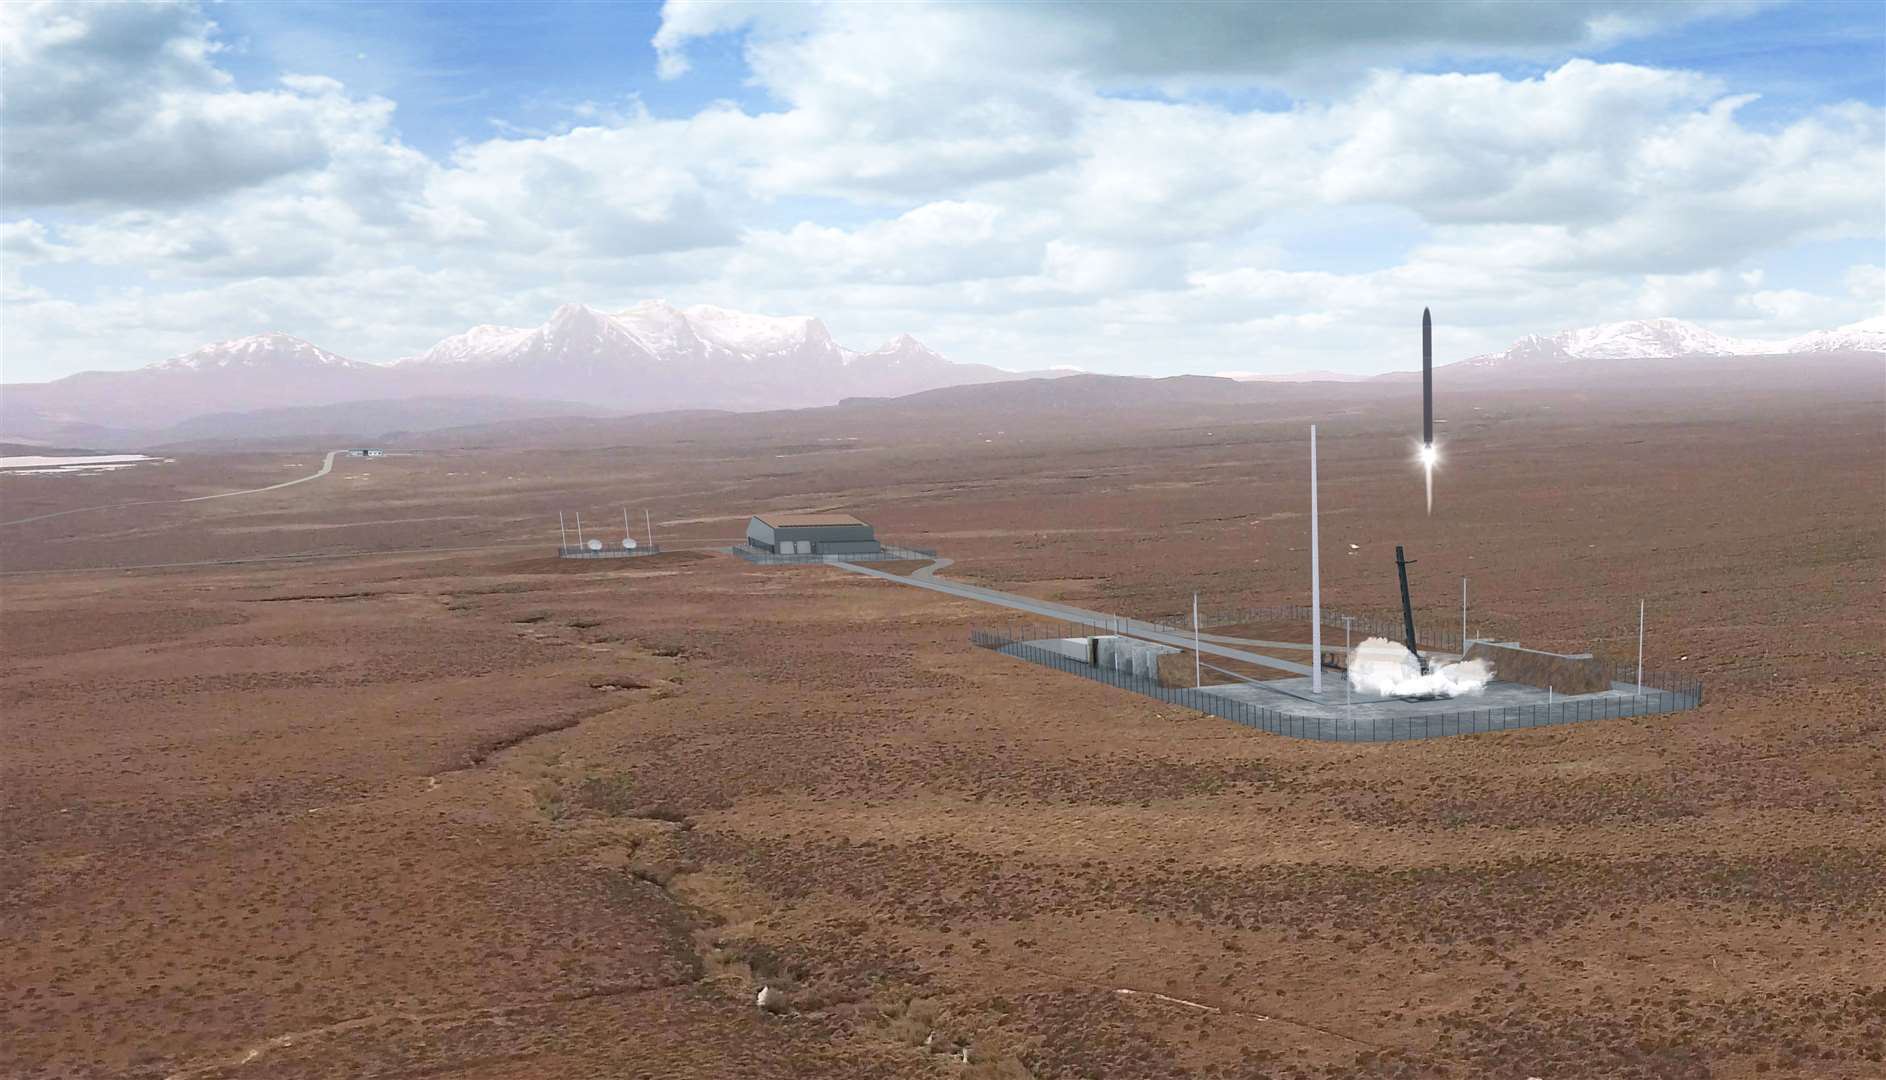 The spaceport is the first of its kind to be granted planning permission.